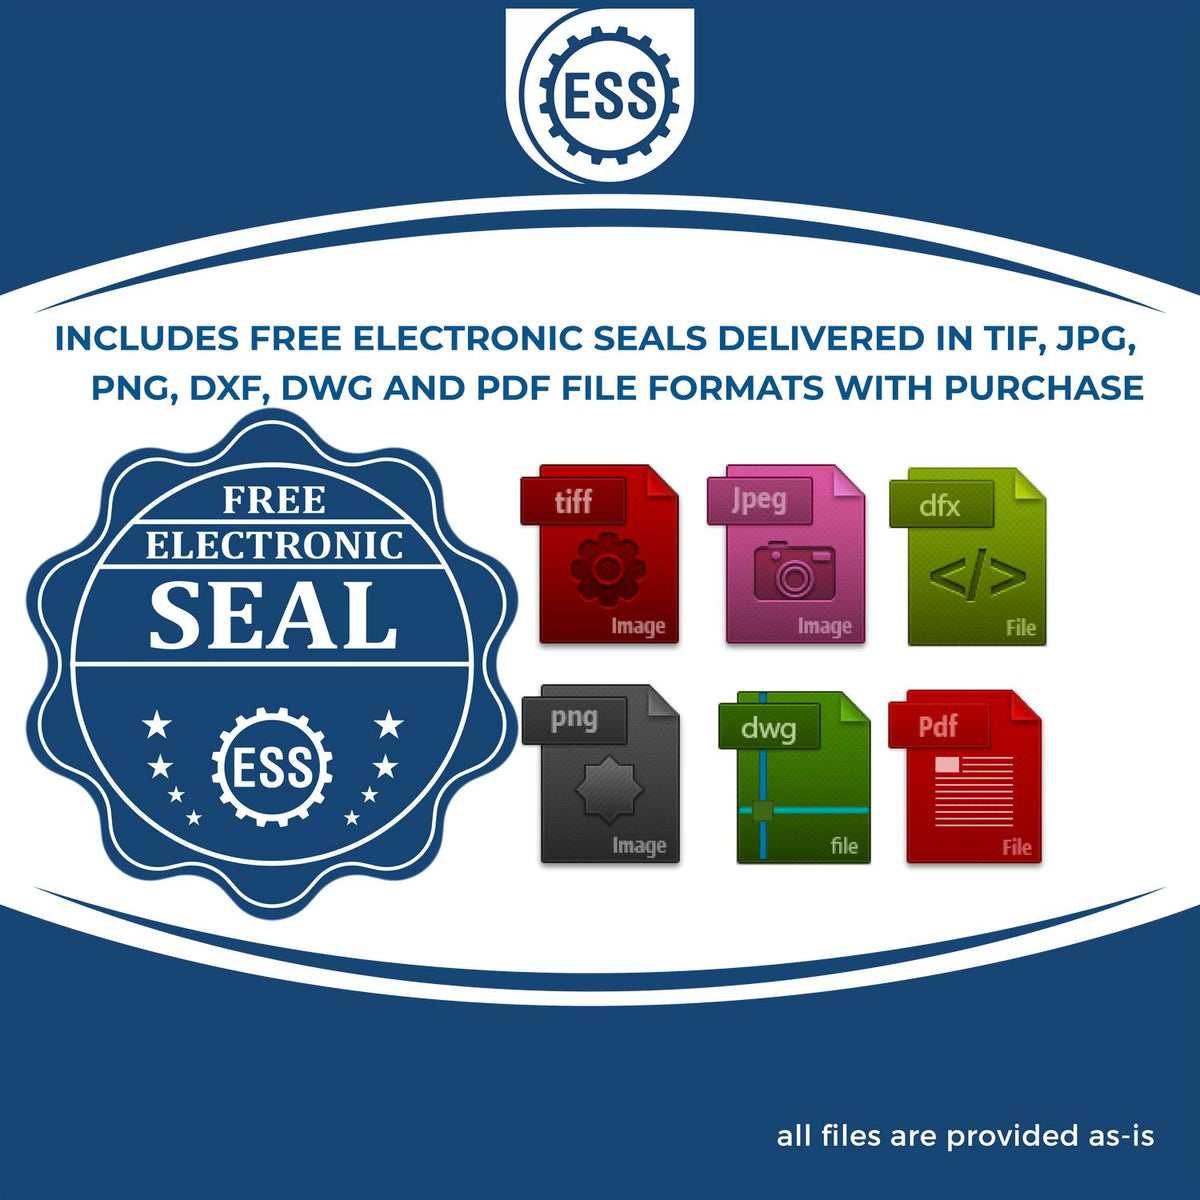 An infographic for the free electronic seal for the Nevada Engineer Desk Seal illustrating the different file type icons such as DXF, DWG, TIF, JPG and PNG.